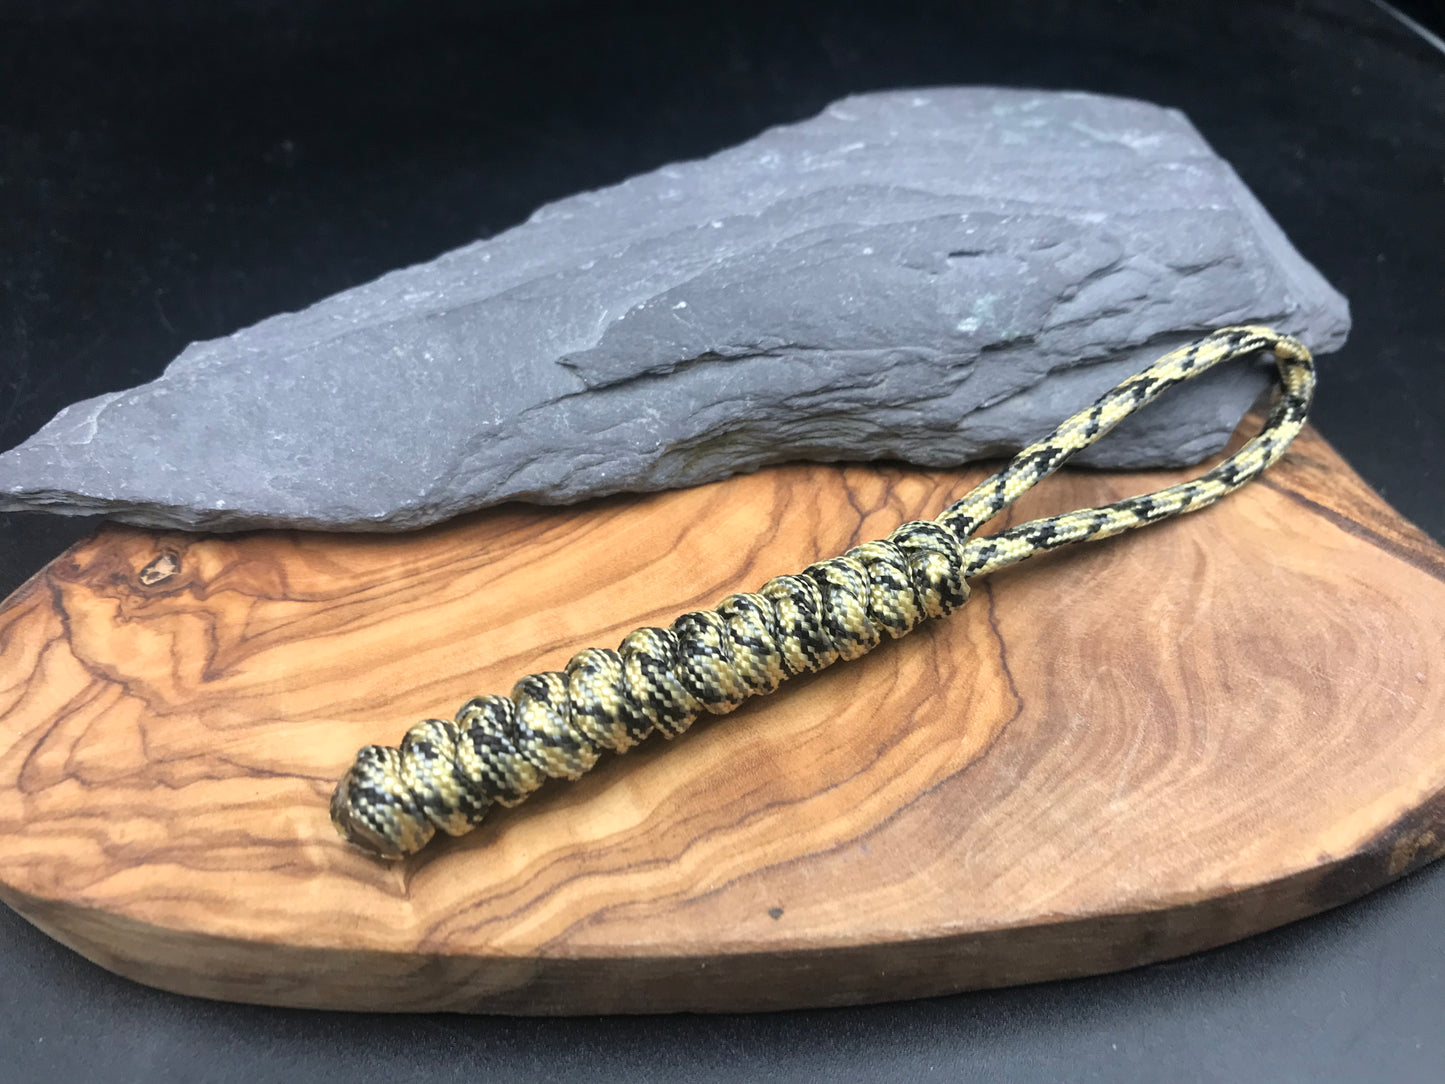 Hand made Paracord lanyard in Desert camo with black coloured snake knot design